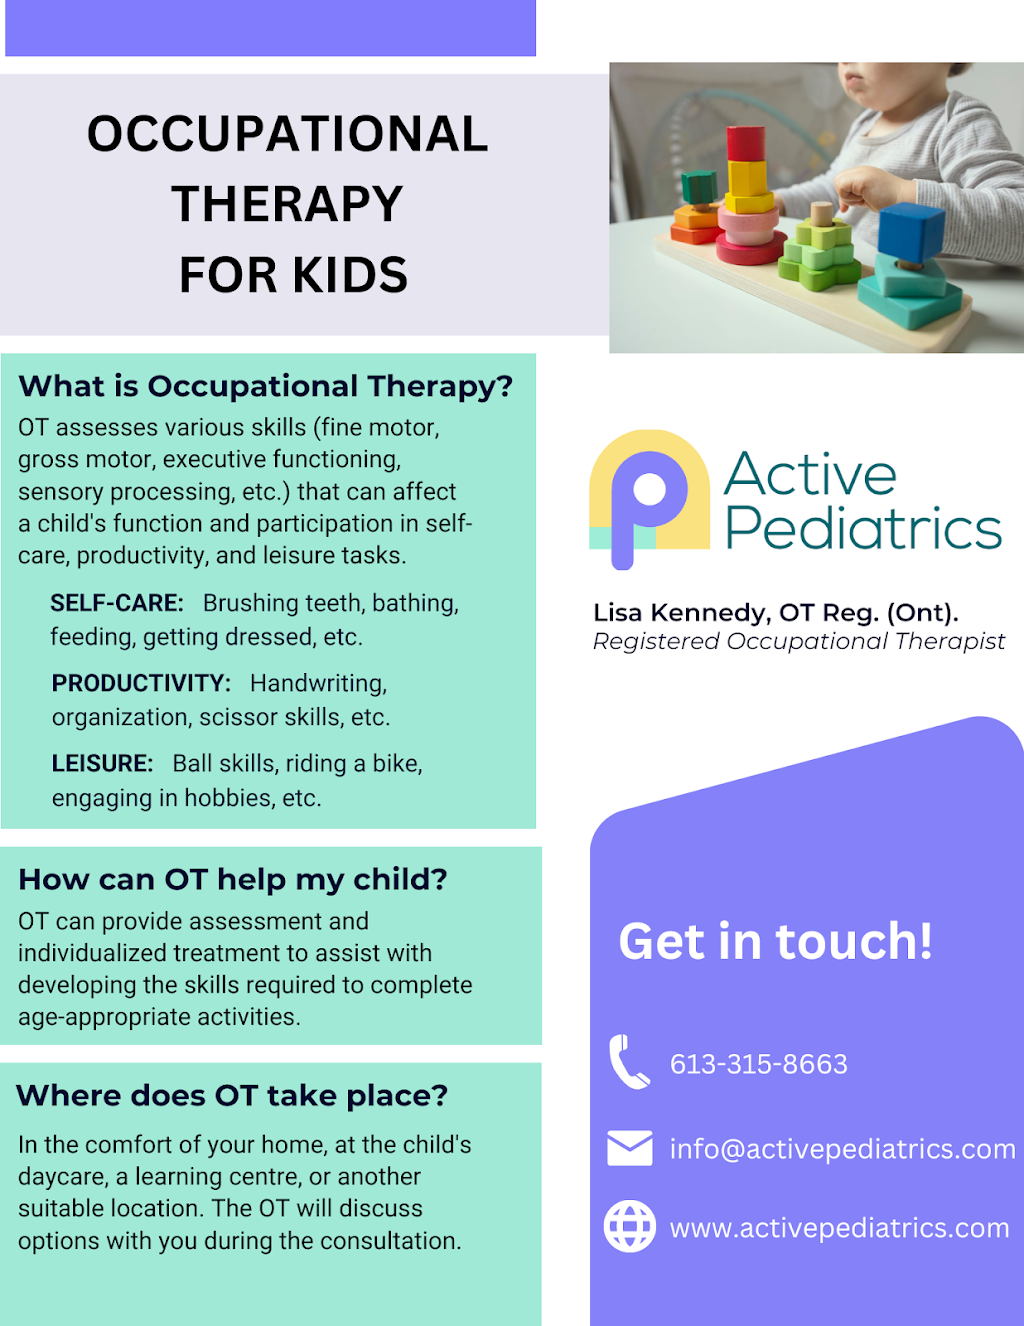 Active Pediatrics - Occupational Therapy | 1420 Youville Dr Unit #7, Orléans, ON K1C 7B3, Canada | Phone: (613) 315-8663